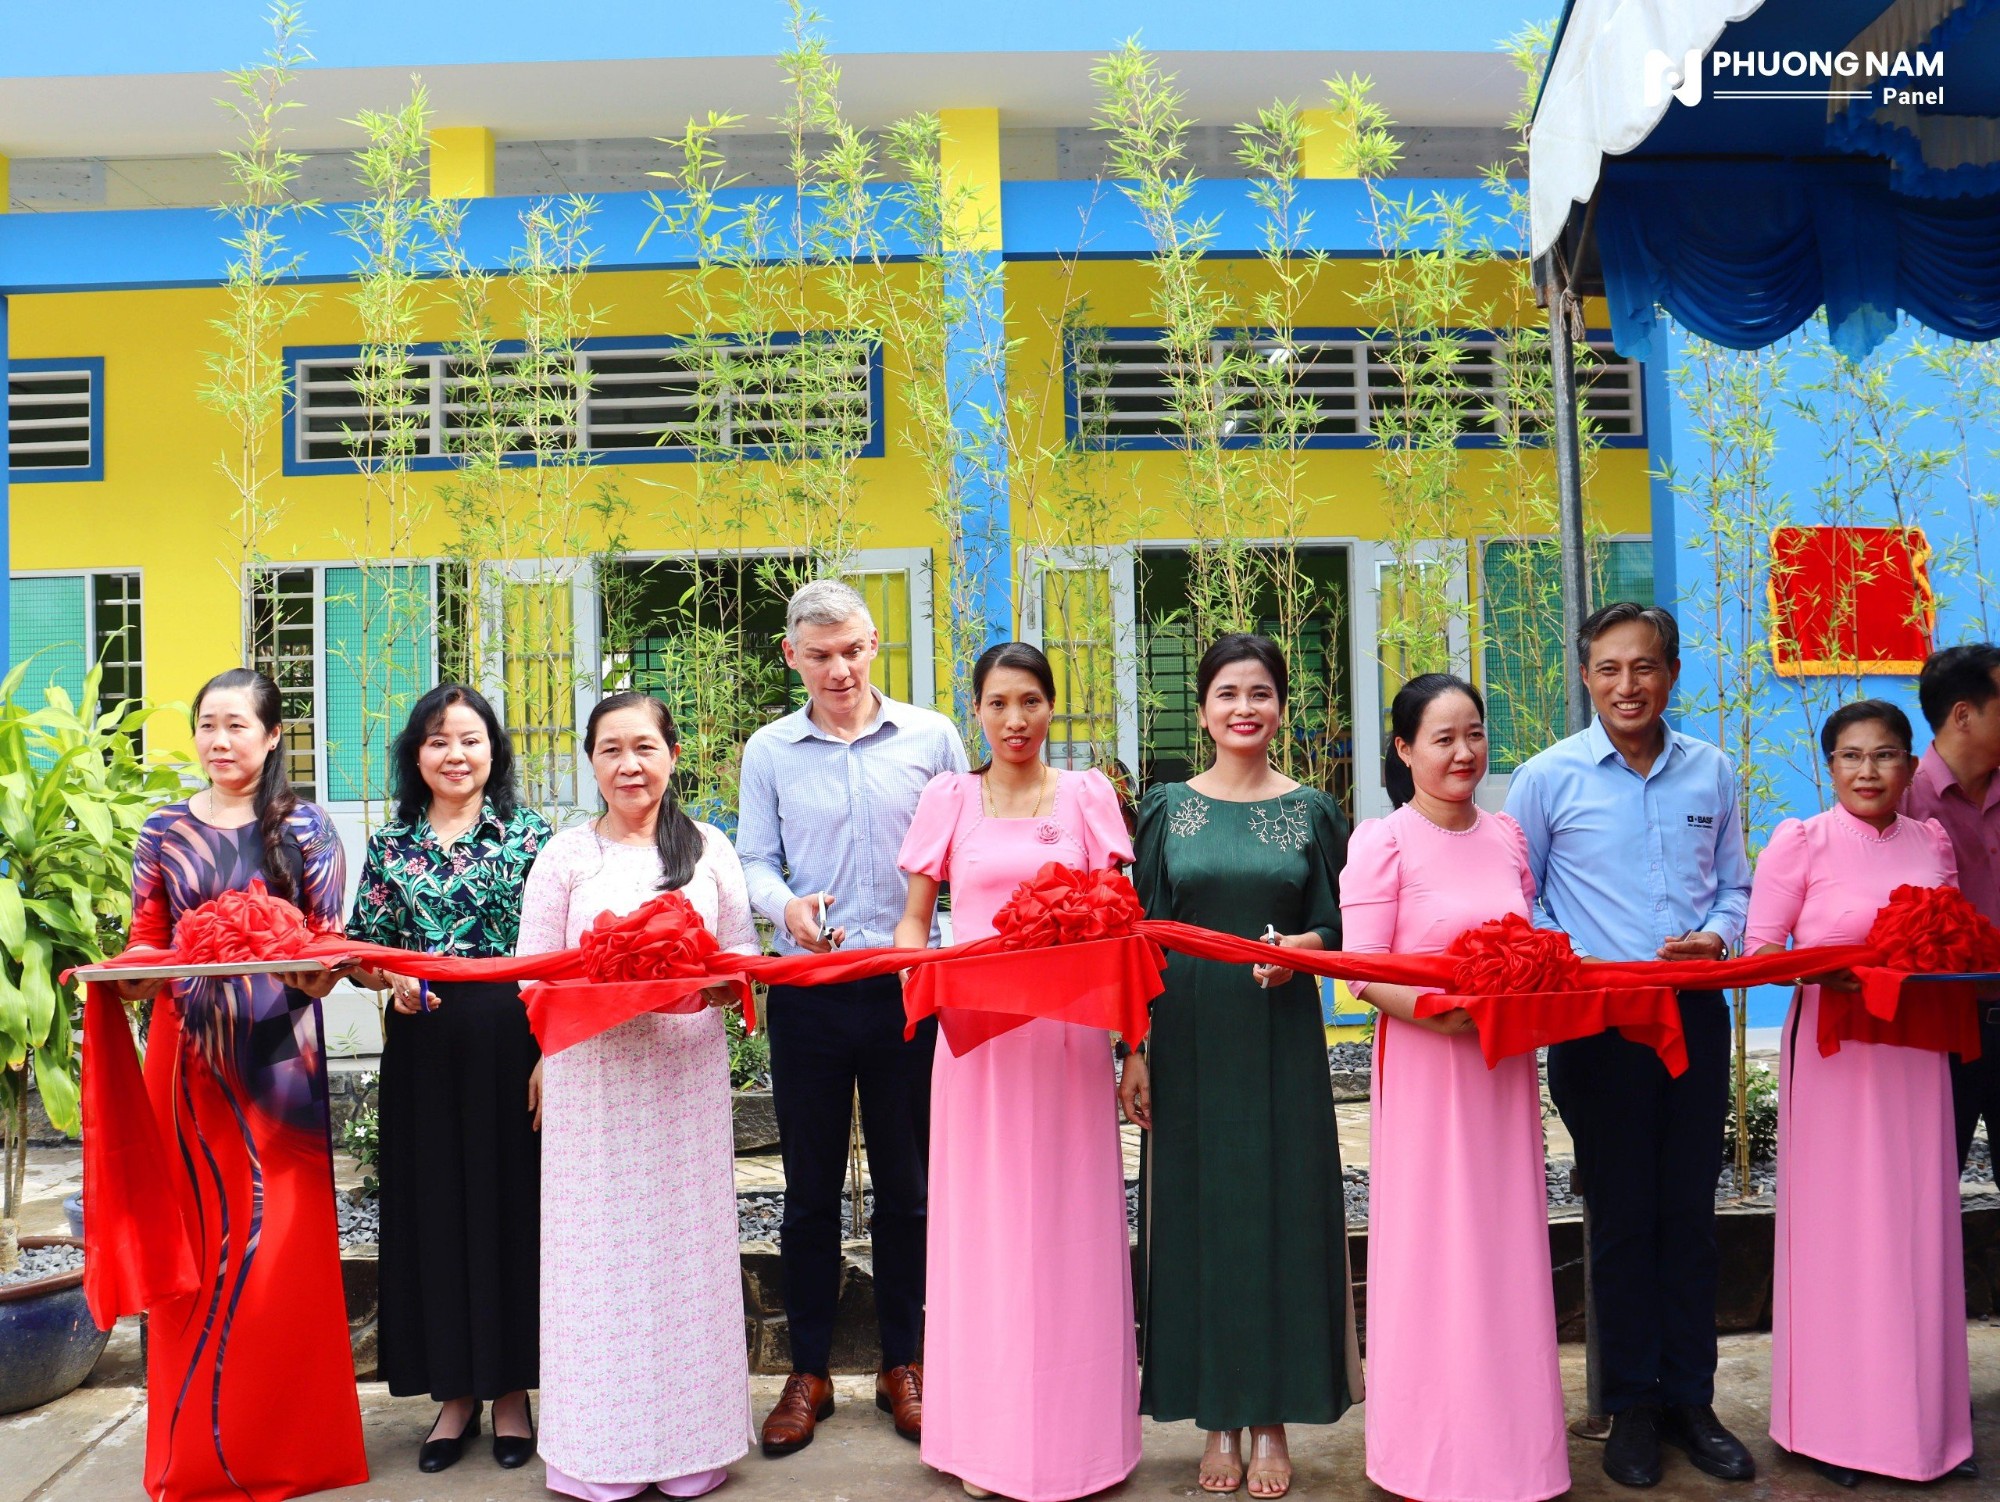 PHƯƠNG NAM PANEL | SPECIAL GIFT ON THE OCCASION OF THE INAUGURATION OF HIEU TU C PRIMARY SCHOOL – TRA VINH